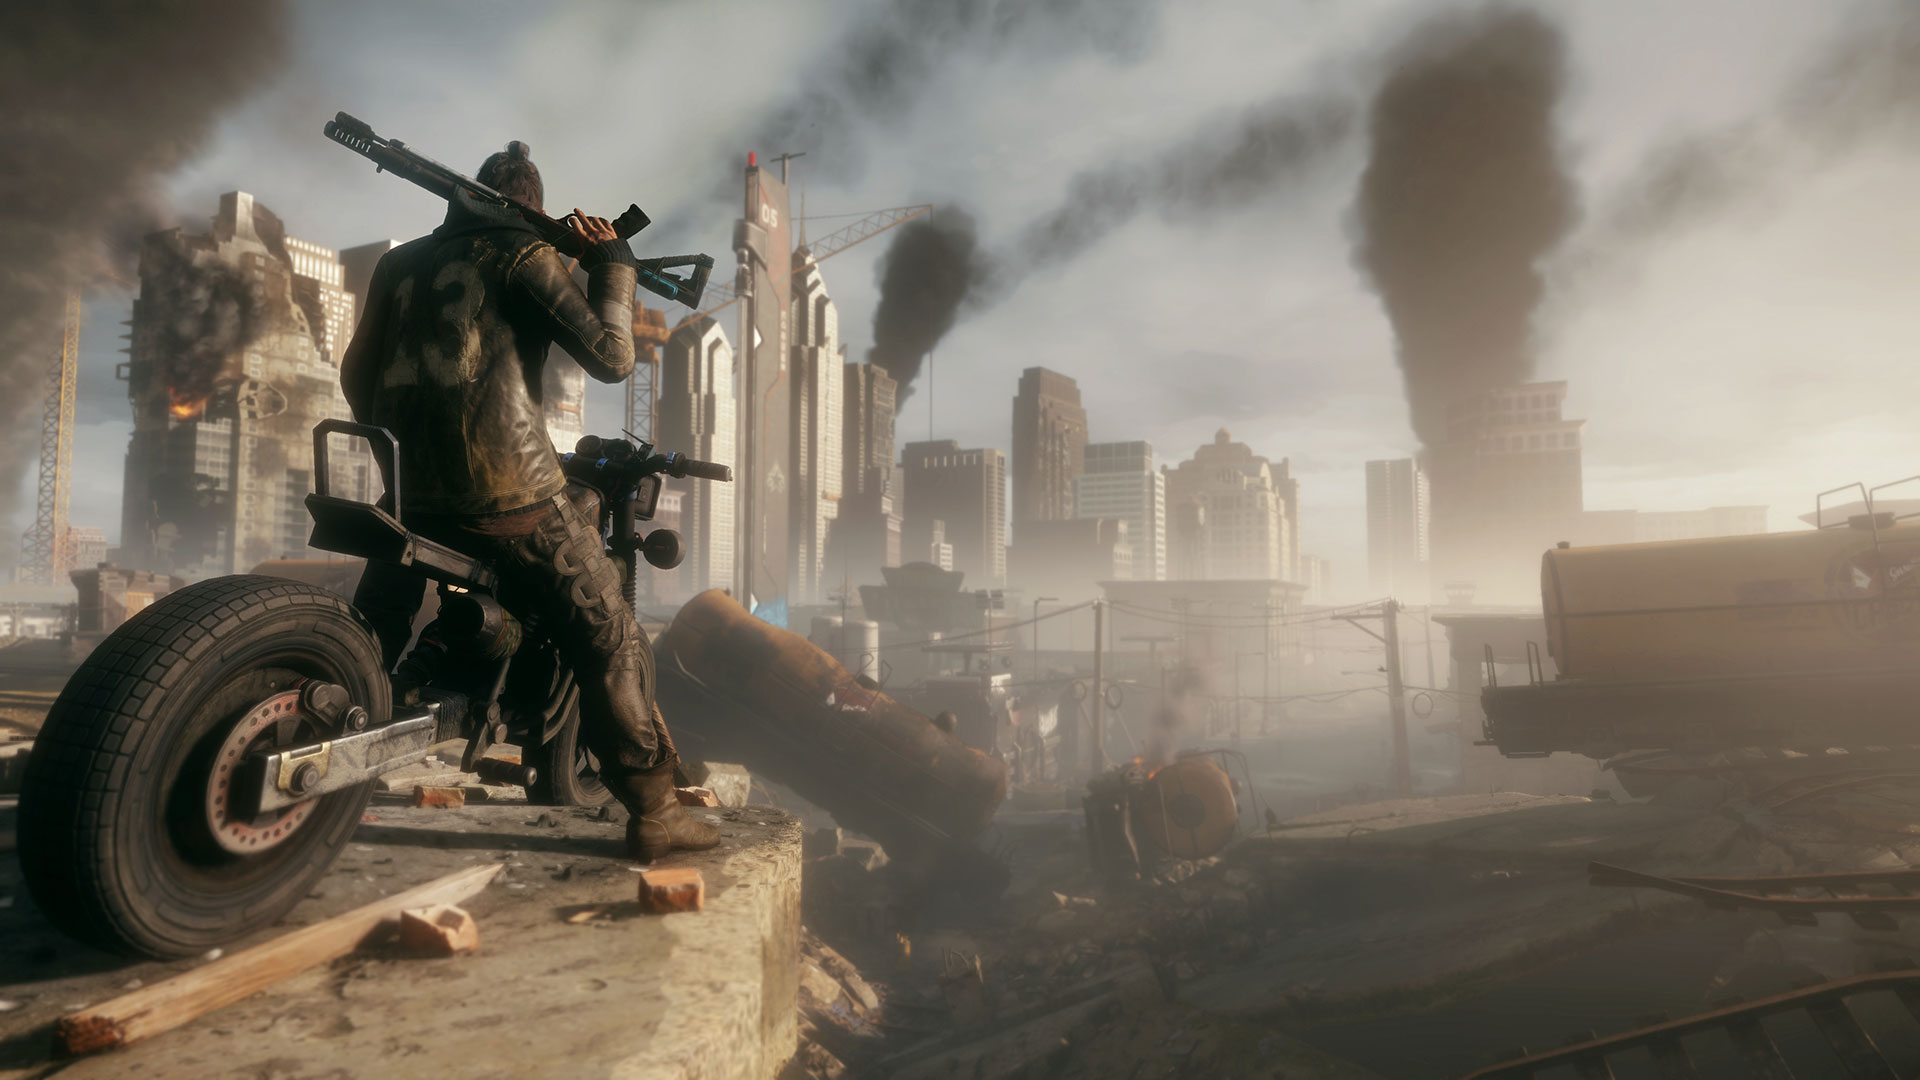 Media asset in full size related to 3dfxzone.it news item entitled as follows: Closed beta, gameplay trailer e screenshots di Homefront: The Revolution | Image Name: news23713_Homefront-The-Revolution_6.jpg